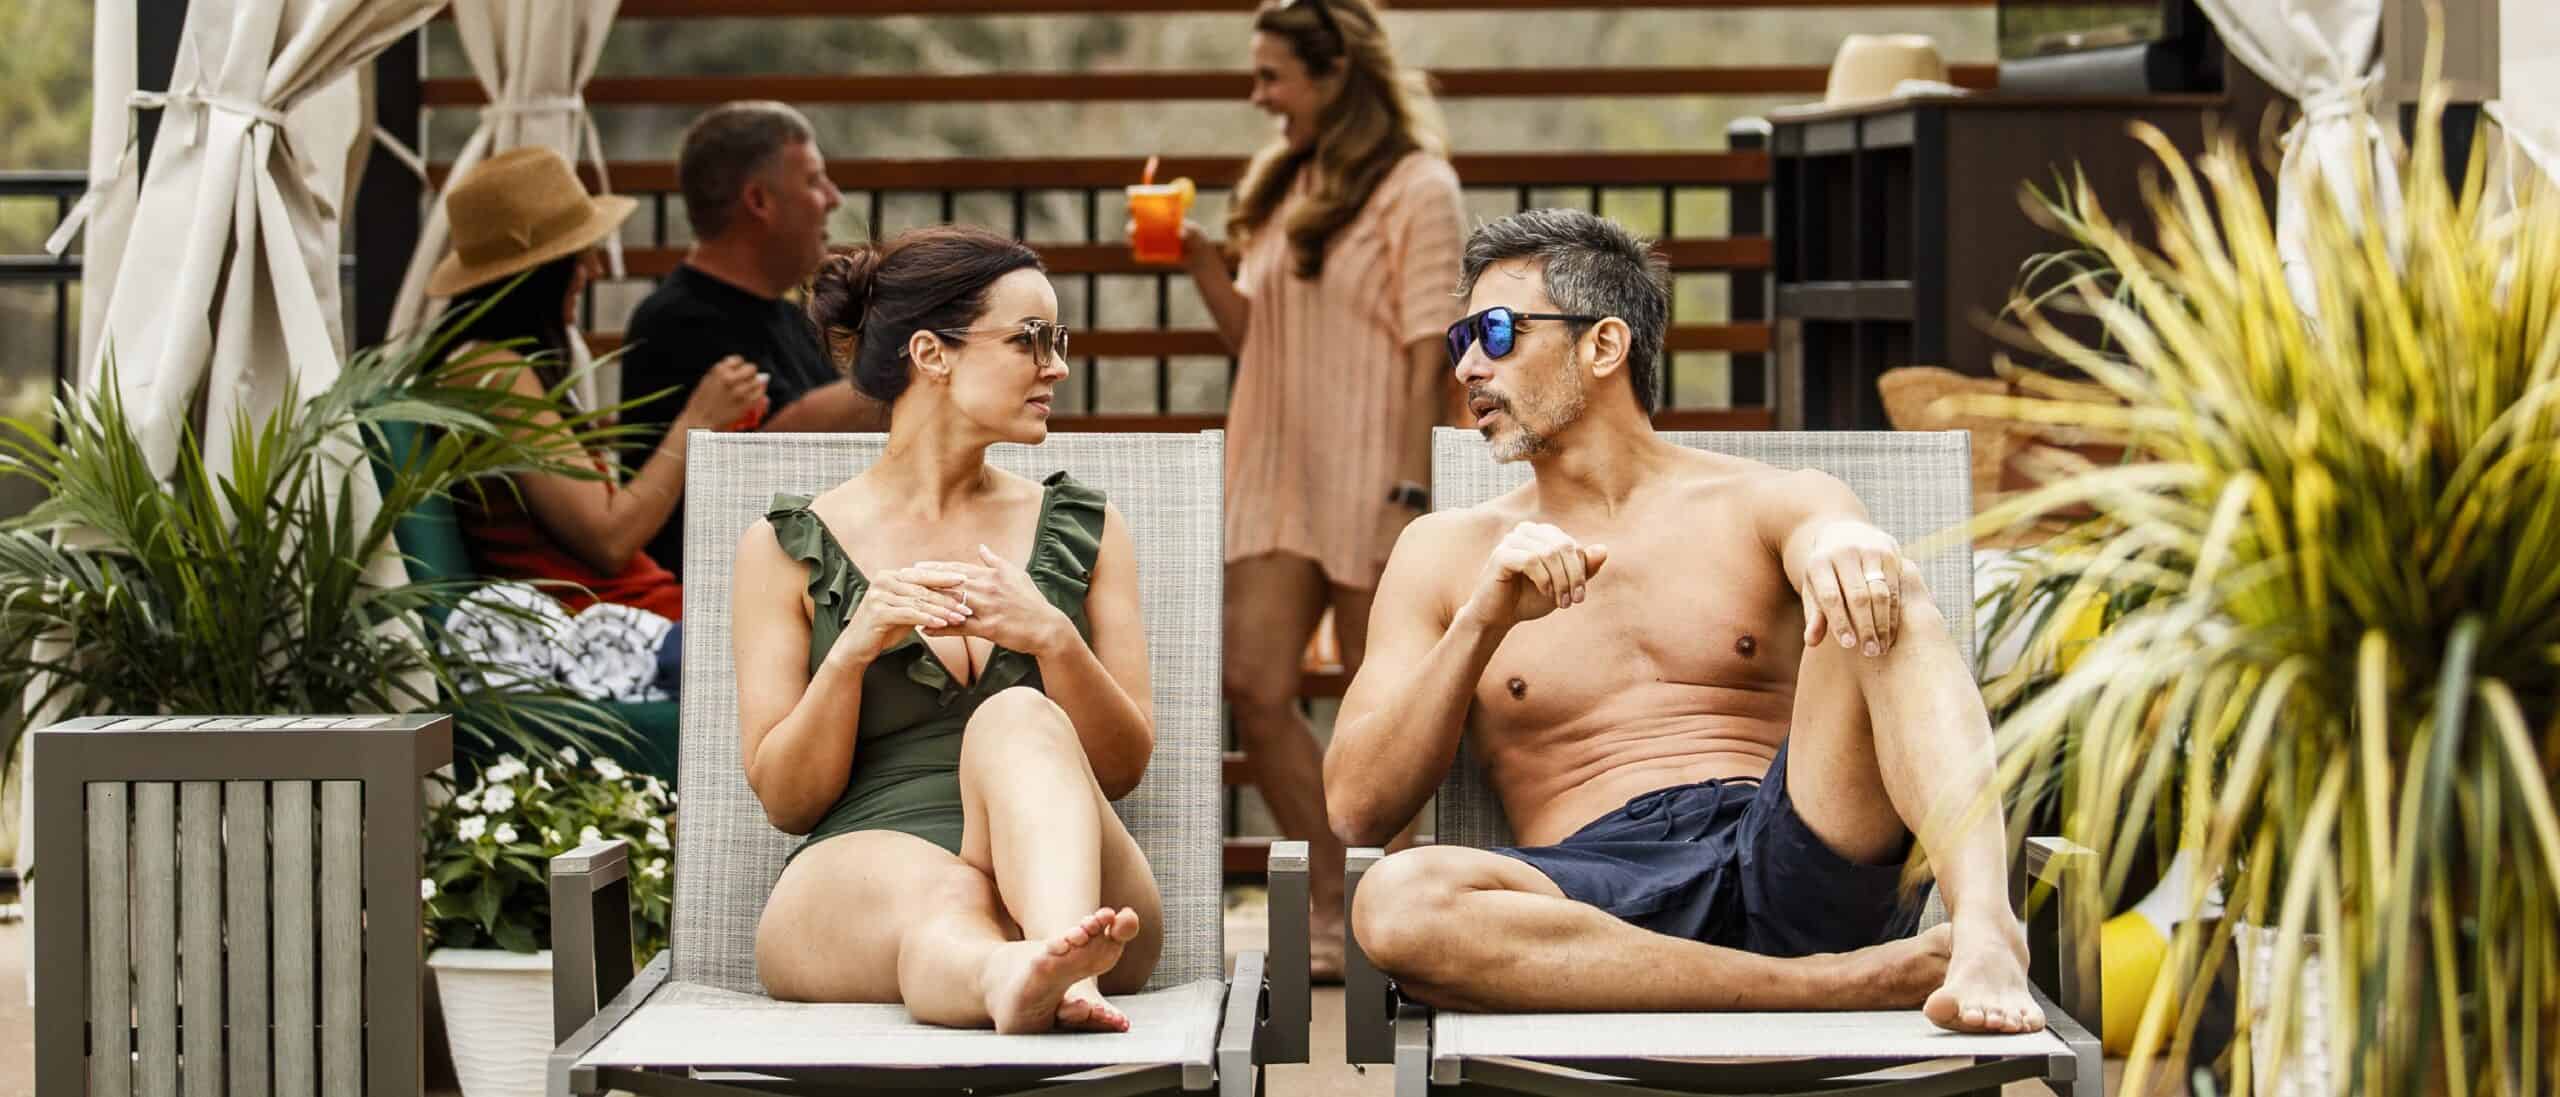 A man and woman, wearing swimsuits and sunglasses, sit in cabana chairs.